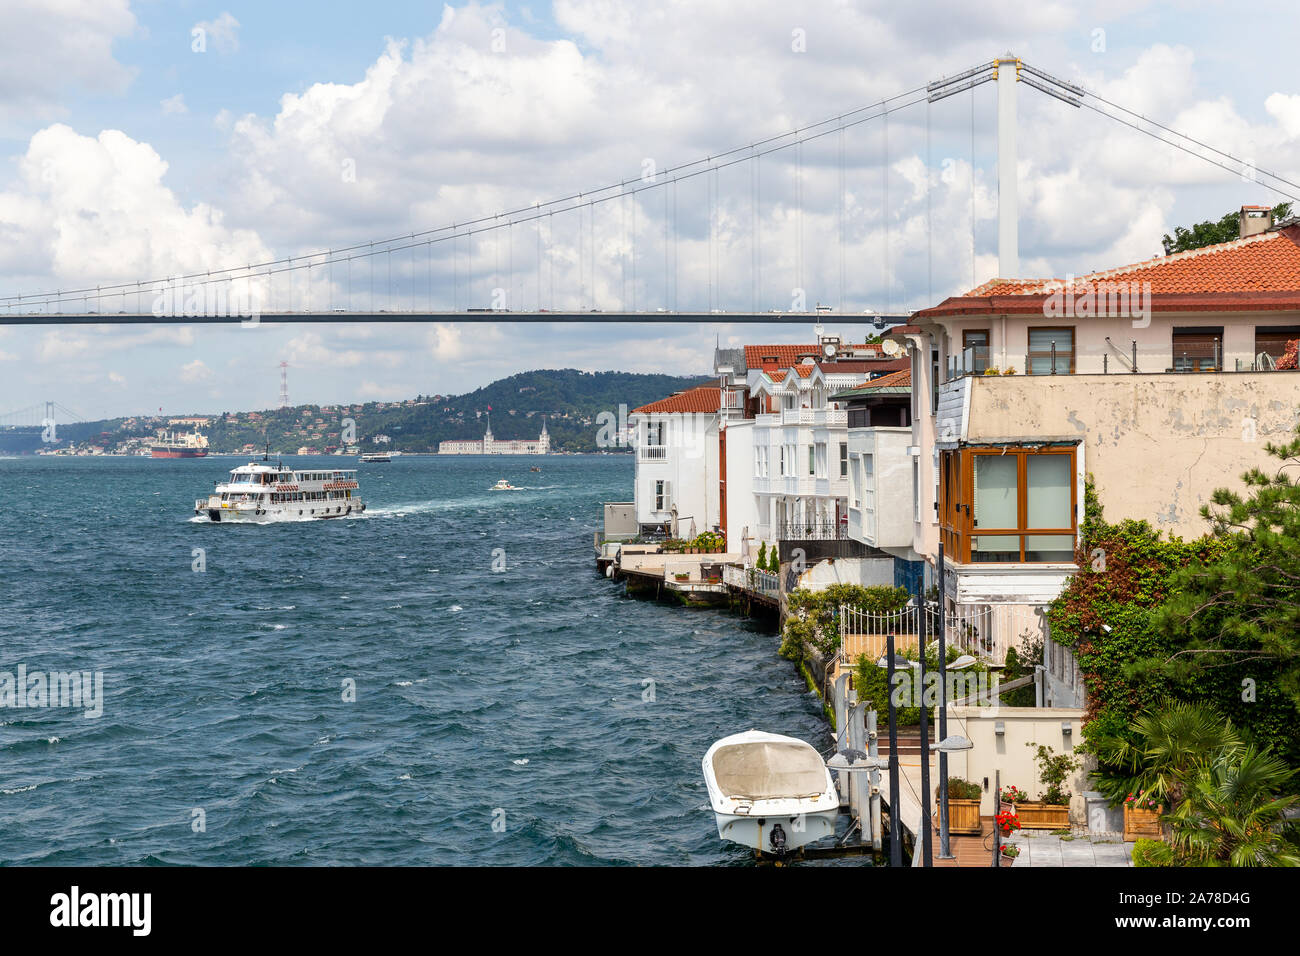 View of mansions in the Bosphorus from Kuzguncuk. Kuzguncuk is a neighborhood in the Uskudar district on the Asian side of the Bosphorus in Istanbul Stock Photo